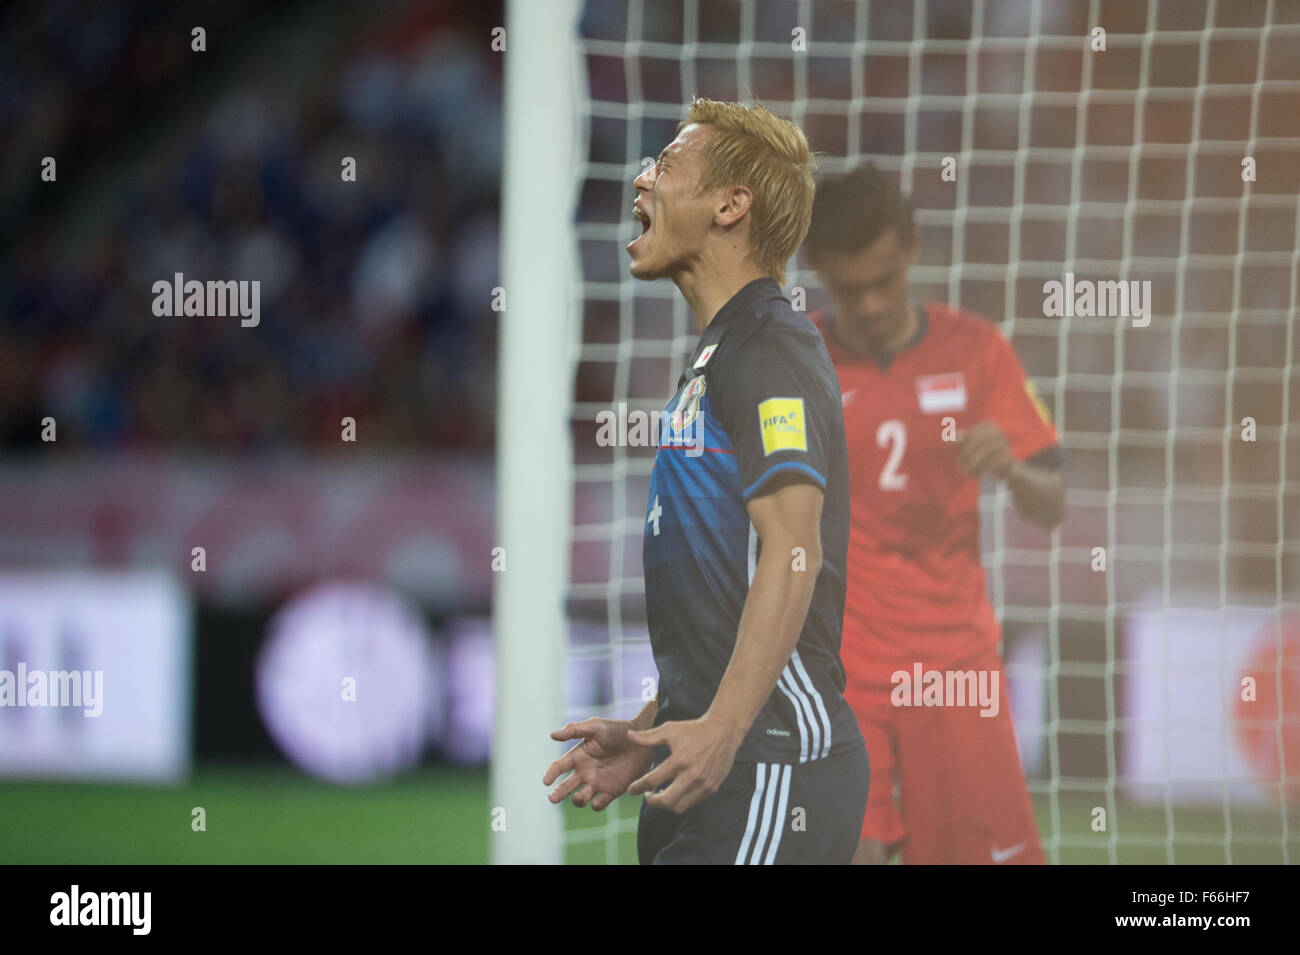 Honda Keisuke reacts after missing a chance, Japan vs Singapore in the 2018 FIFA World Cup Russia Qualifiers Round 2 - Group E at the Sports Hub Stadium on 12 Nov 2015 in Singapore. Japan beat Singapore 3-0. (Photo by Haruhiko Otsuka/Nippon News & Aflo) Stock Photo